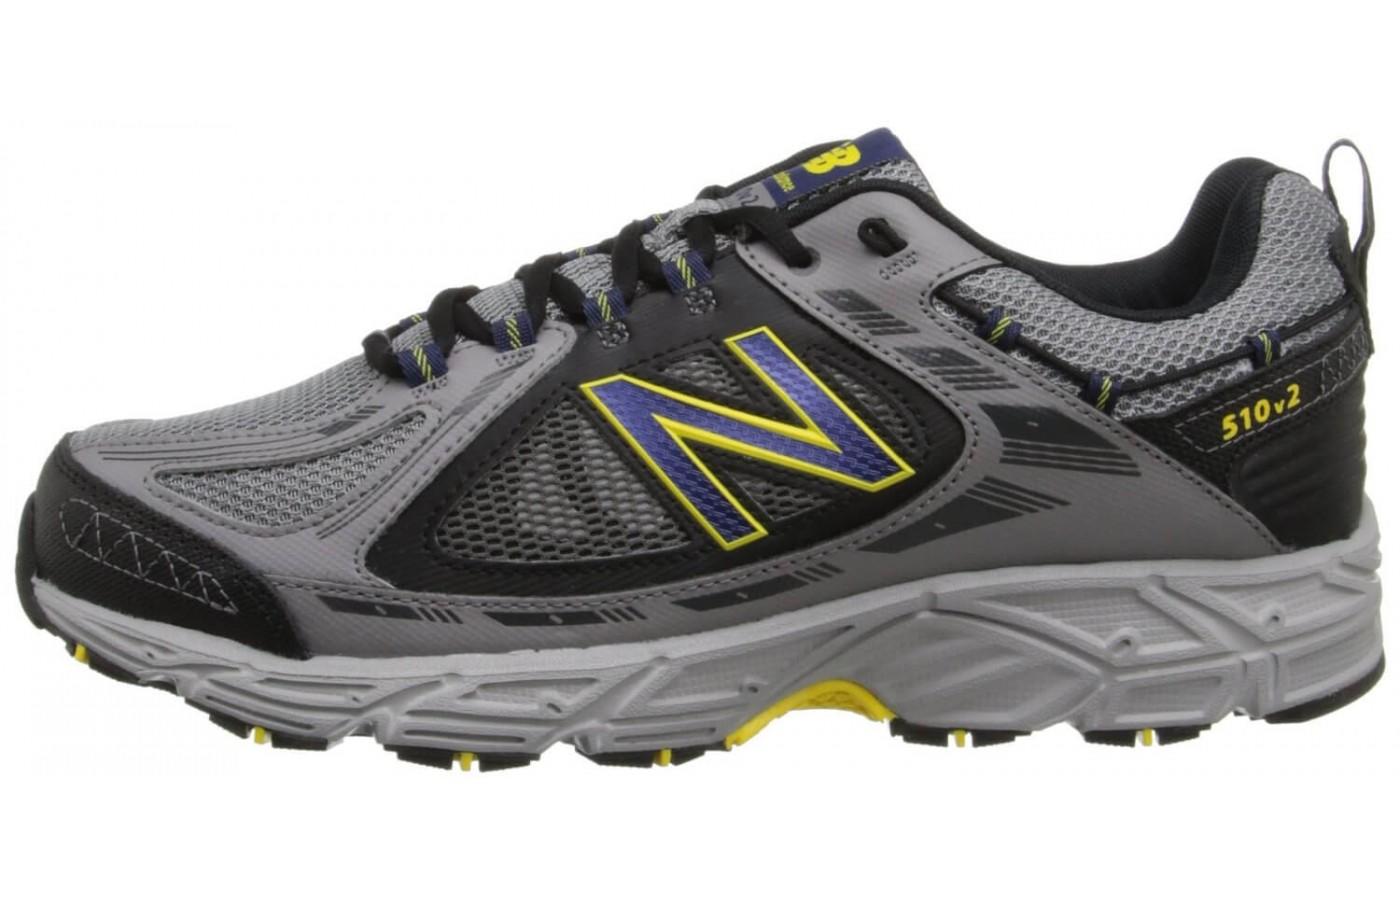 With an emphasis on function over form, the New Balance MT510 is a bit of an eyesore.